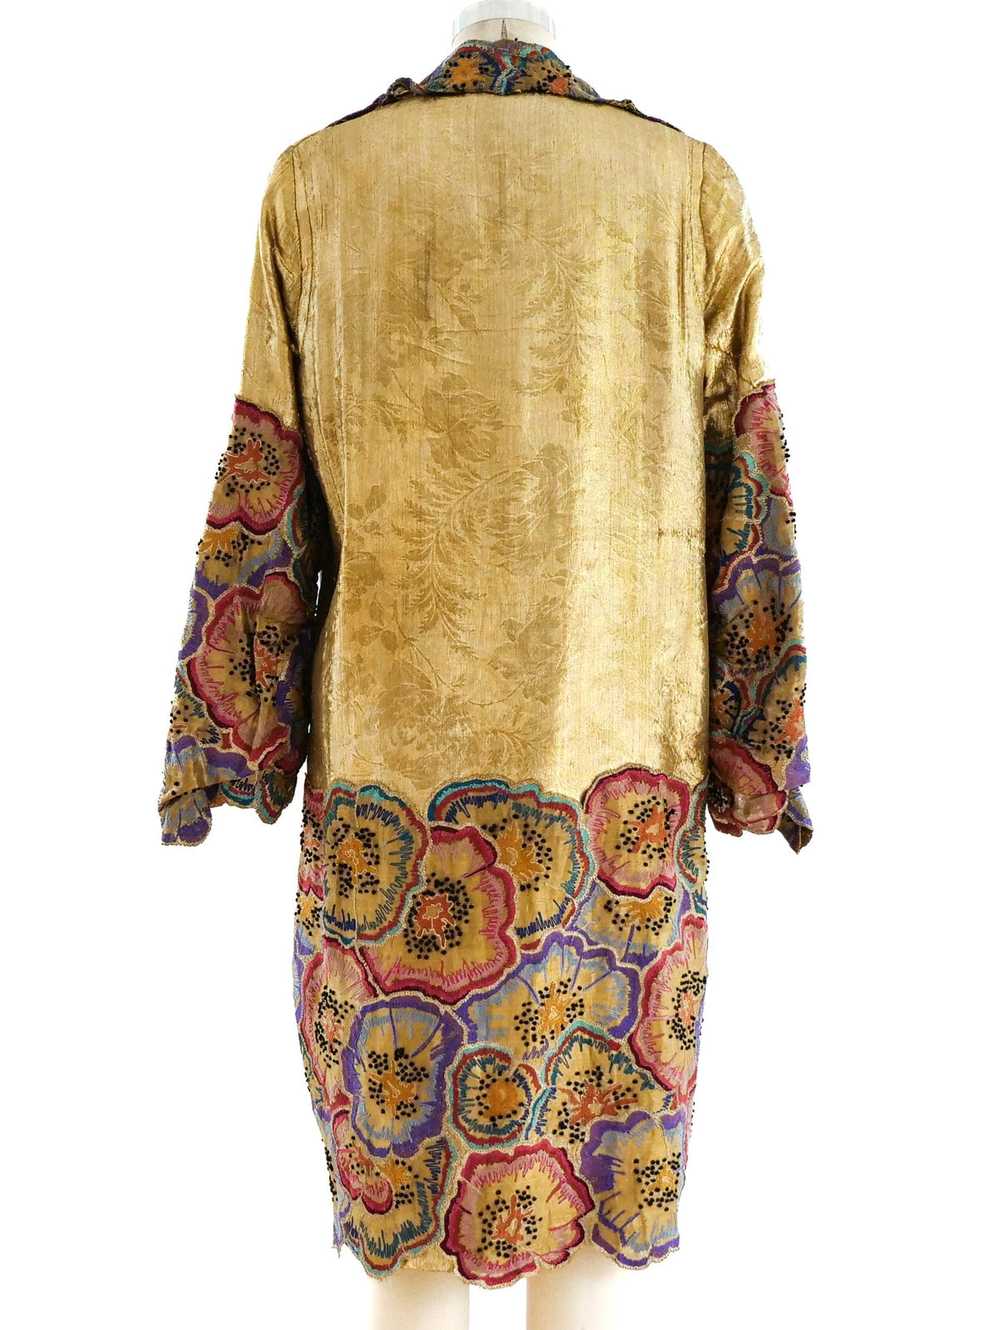 1920's Gold Lame Opera Coat with Floral Embroidery - image 3